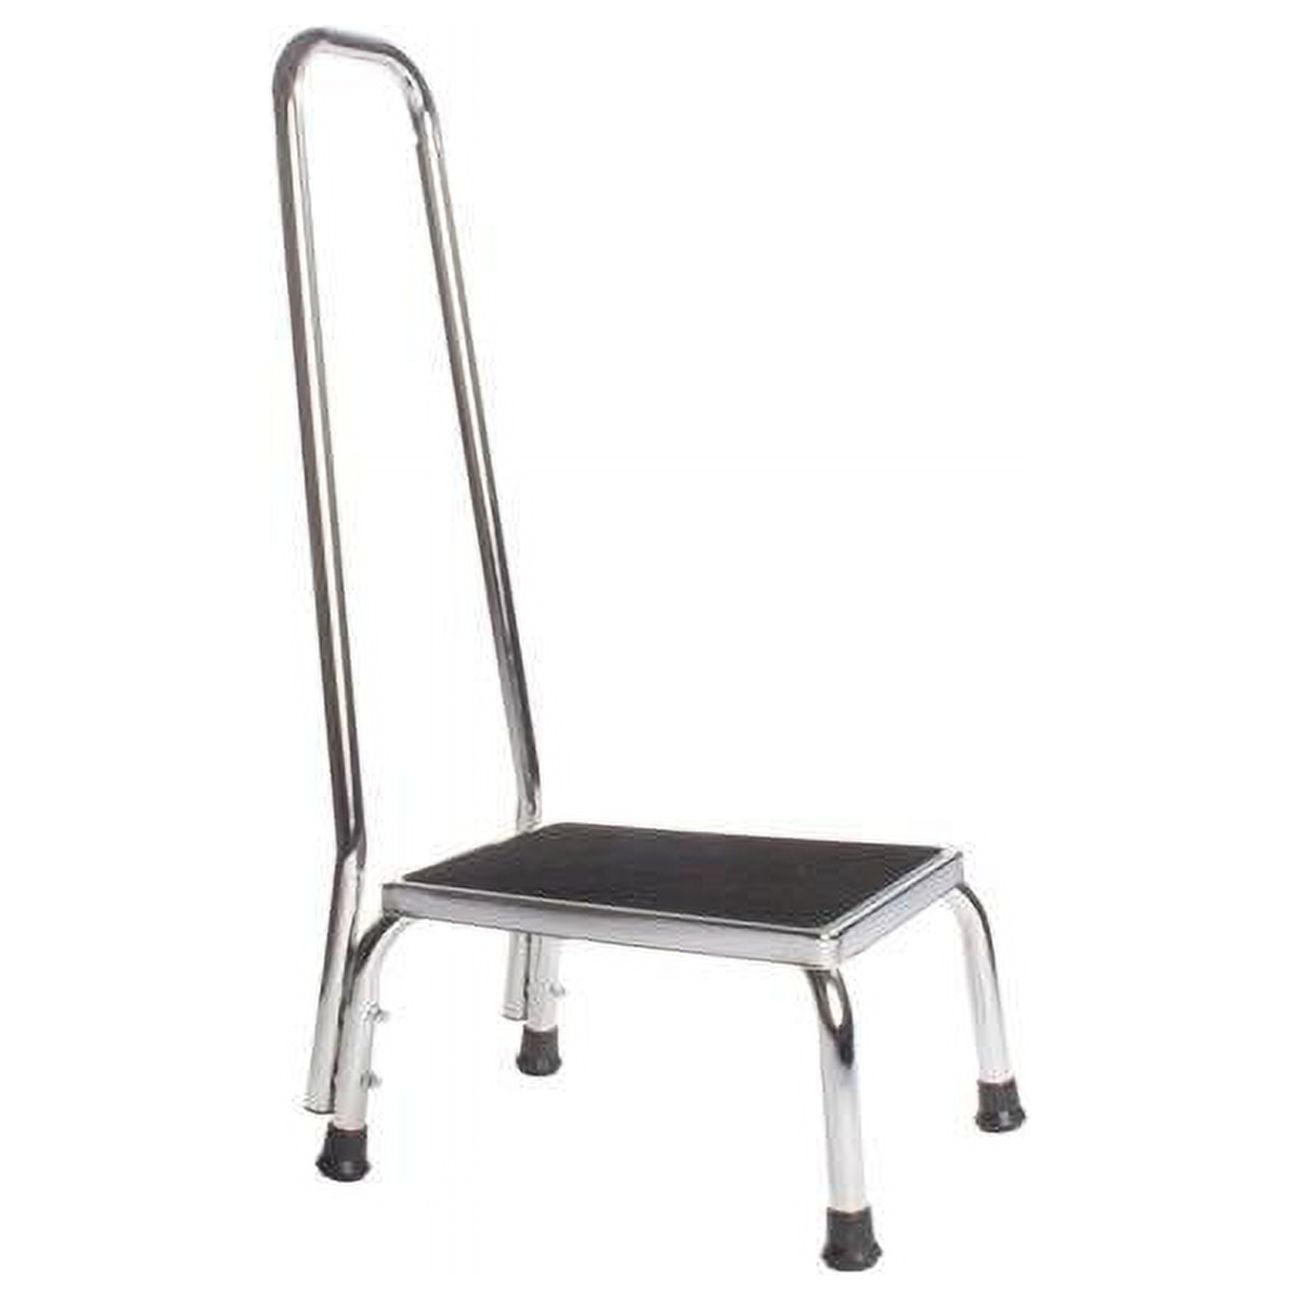 Foot Stool With Handrail, Chrome